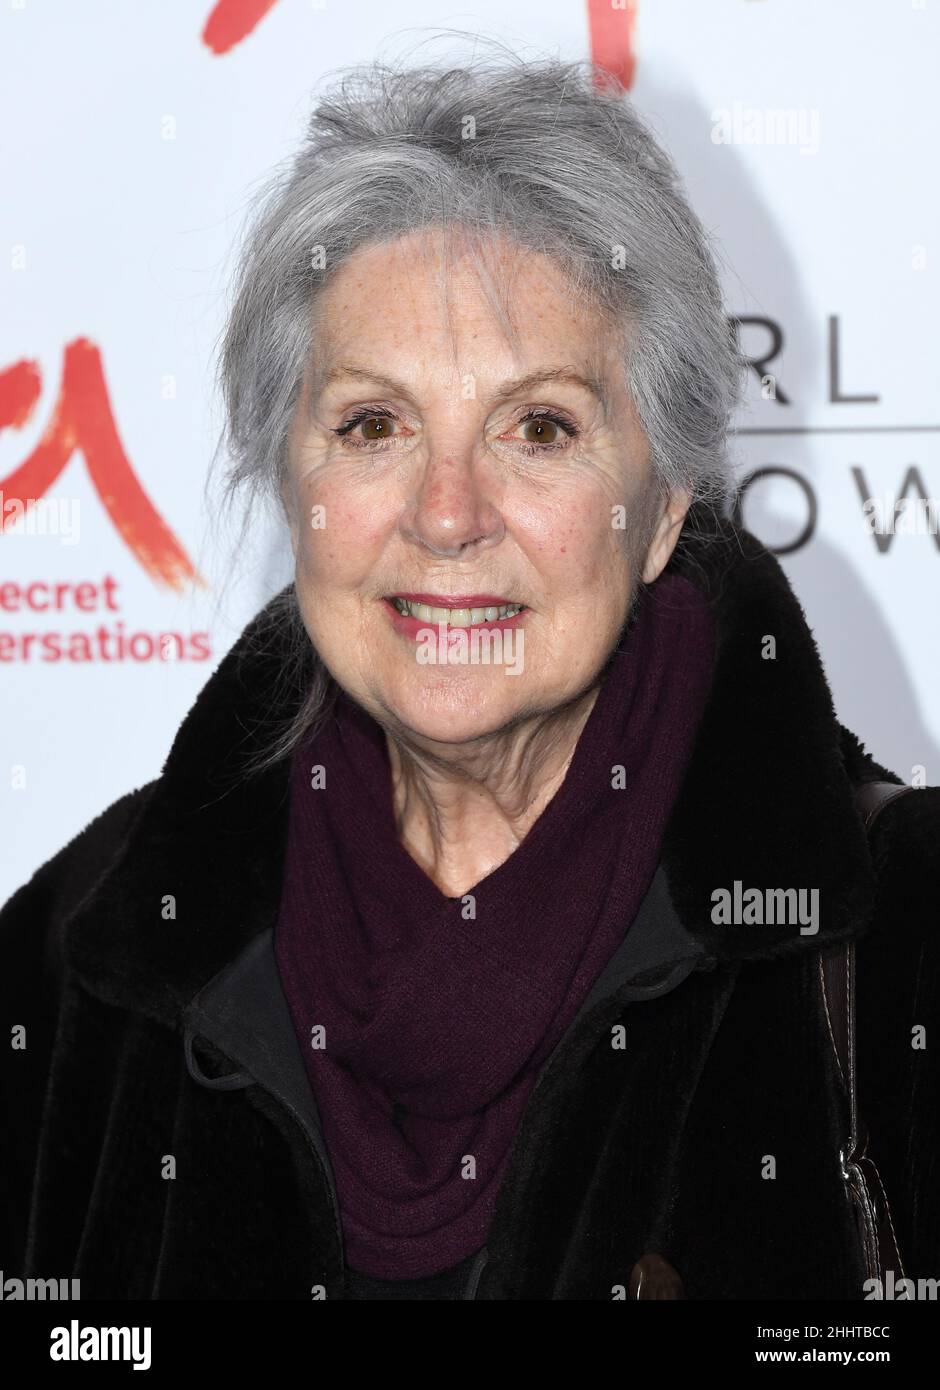 London, UK. January 25th, 2022. London, UK. Penelope Wilton attending the world premiere of AVA The Secret Conversations, the new play by Elizabeth McGovern at Riverside Studios, London. Credit: Doug Peters/EMPICS/Alamy Live News Credit: Doug Peters/Alamy Live News Stock Photo